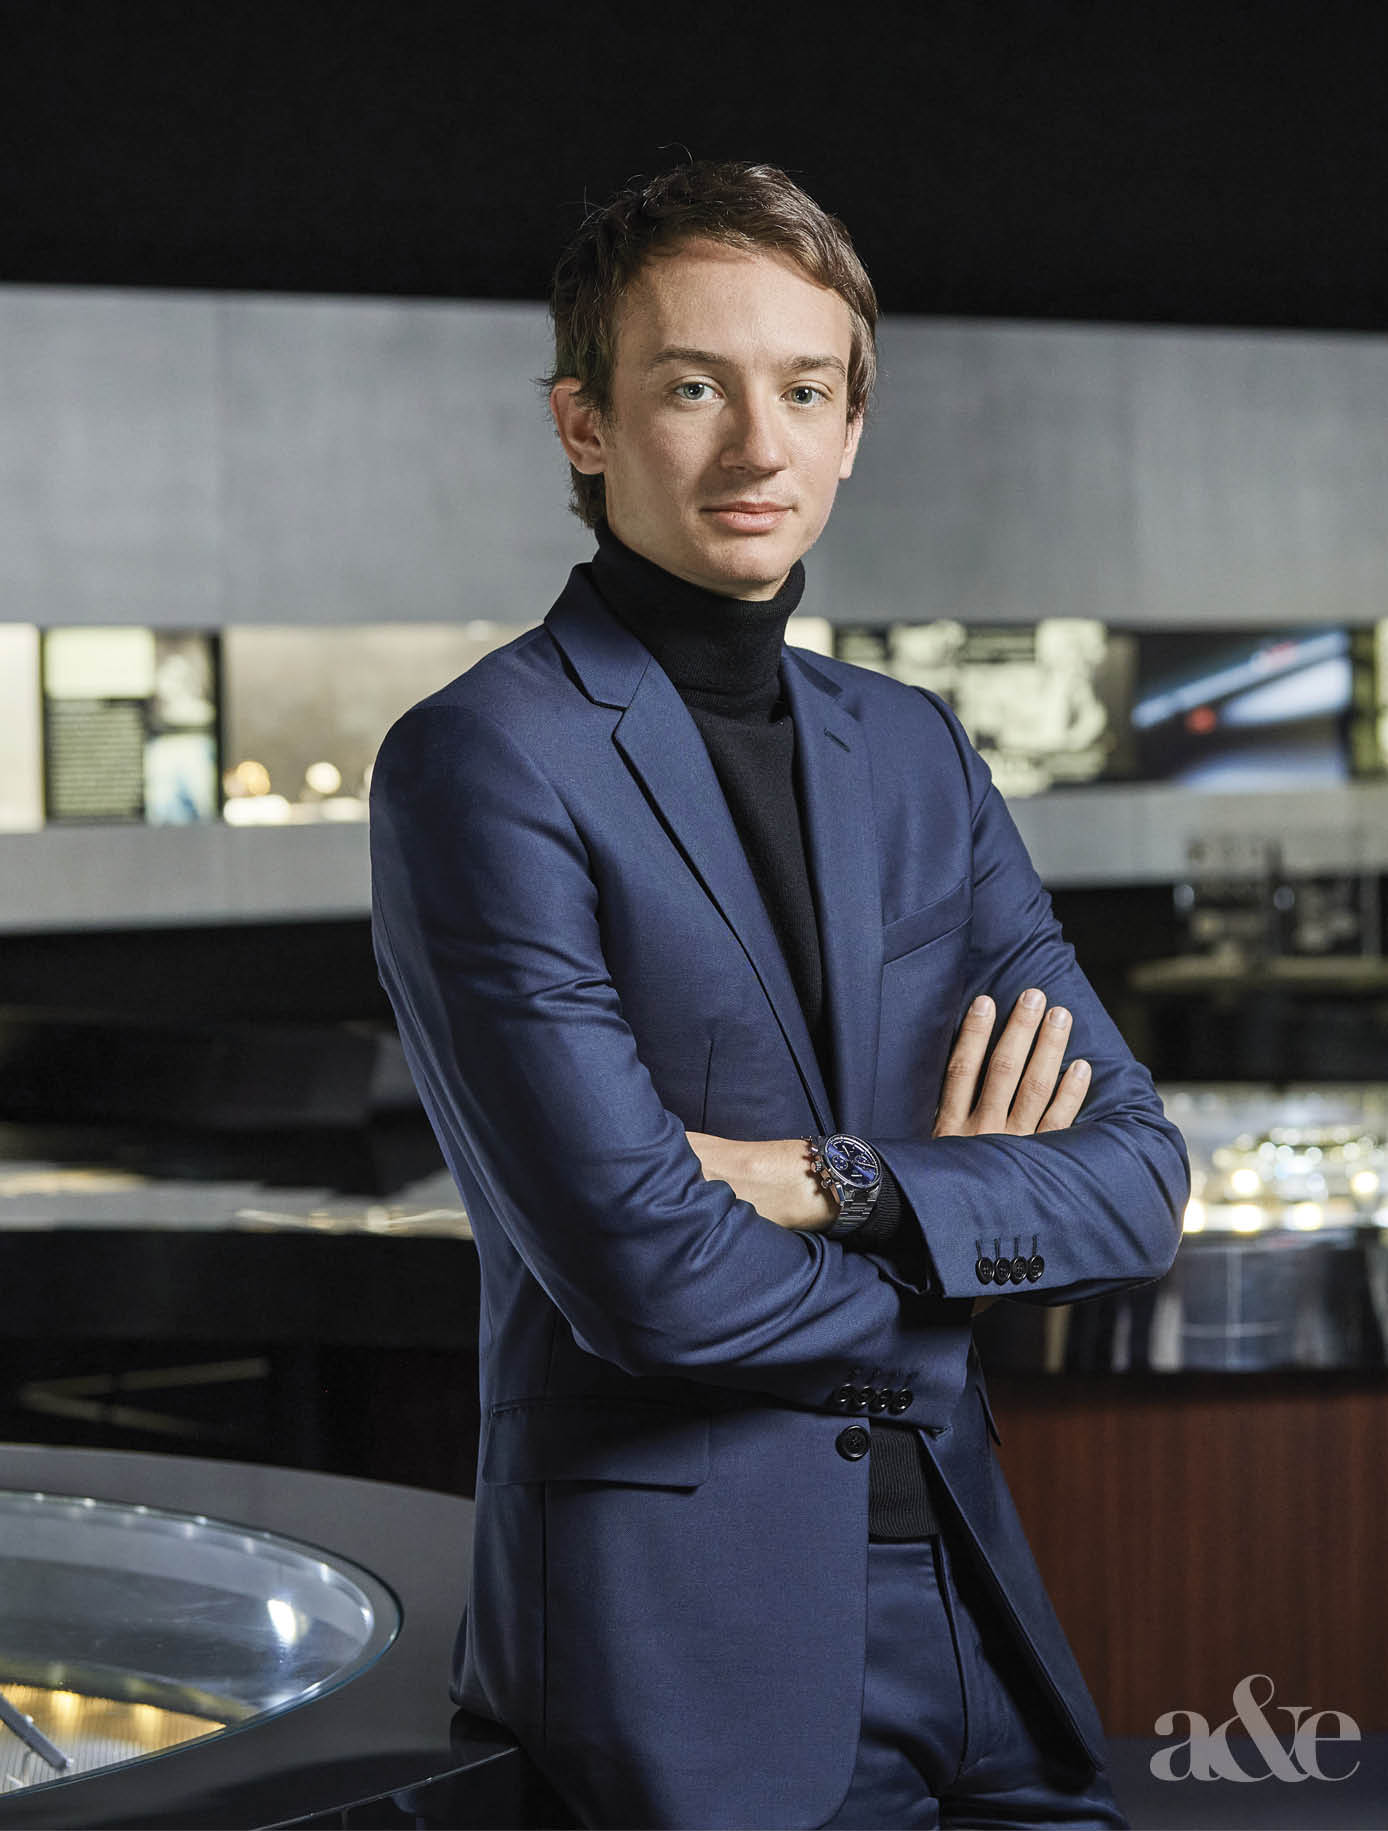 Tag Heuer CEO Frédéric Arnault on his strategy for the brand: the